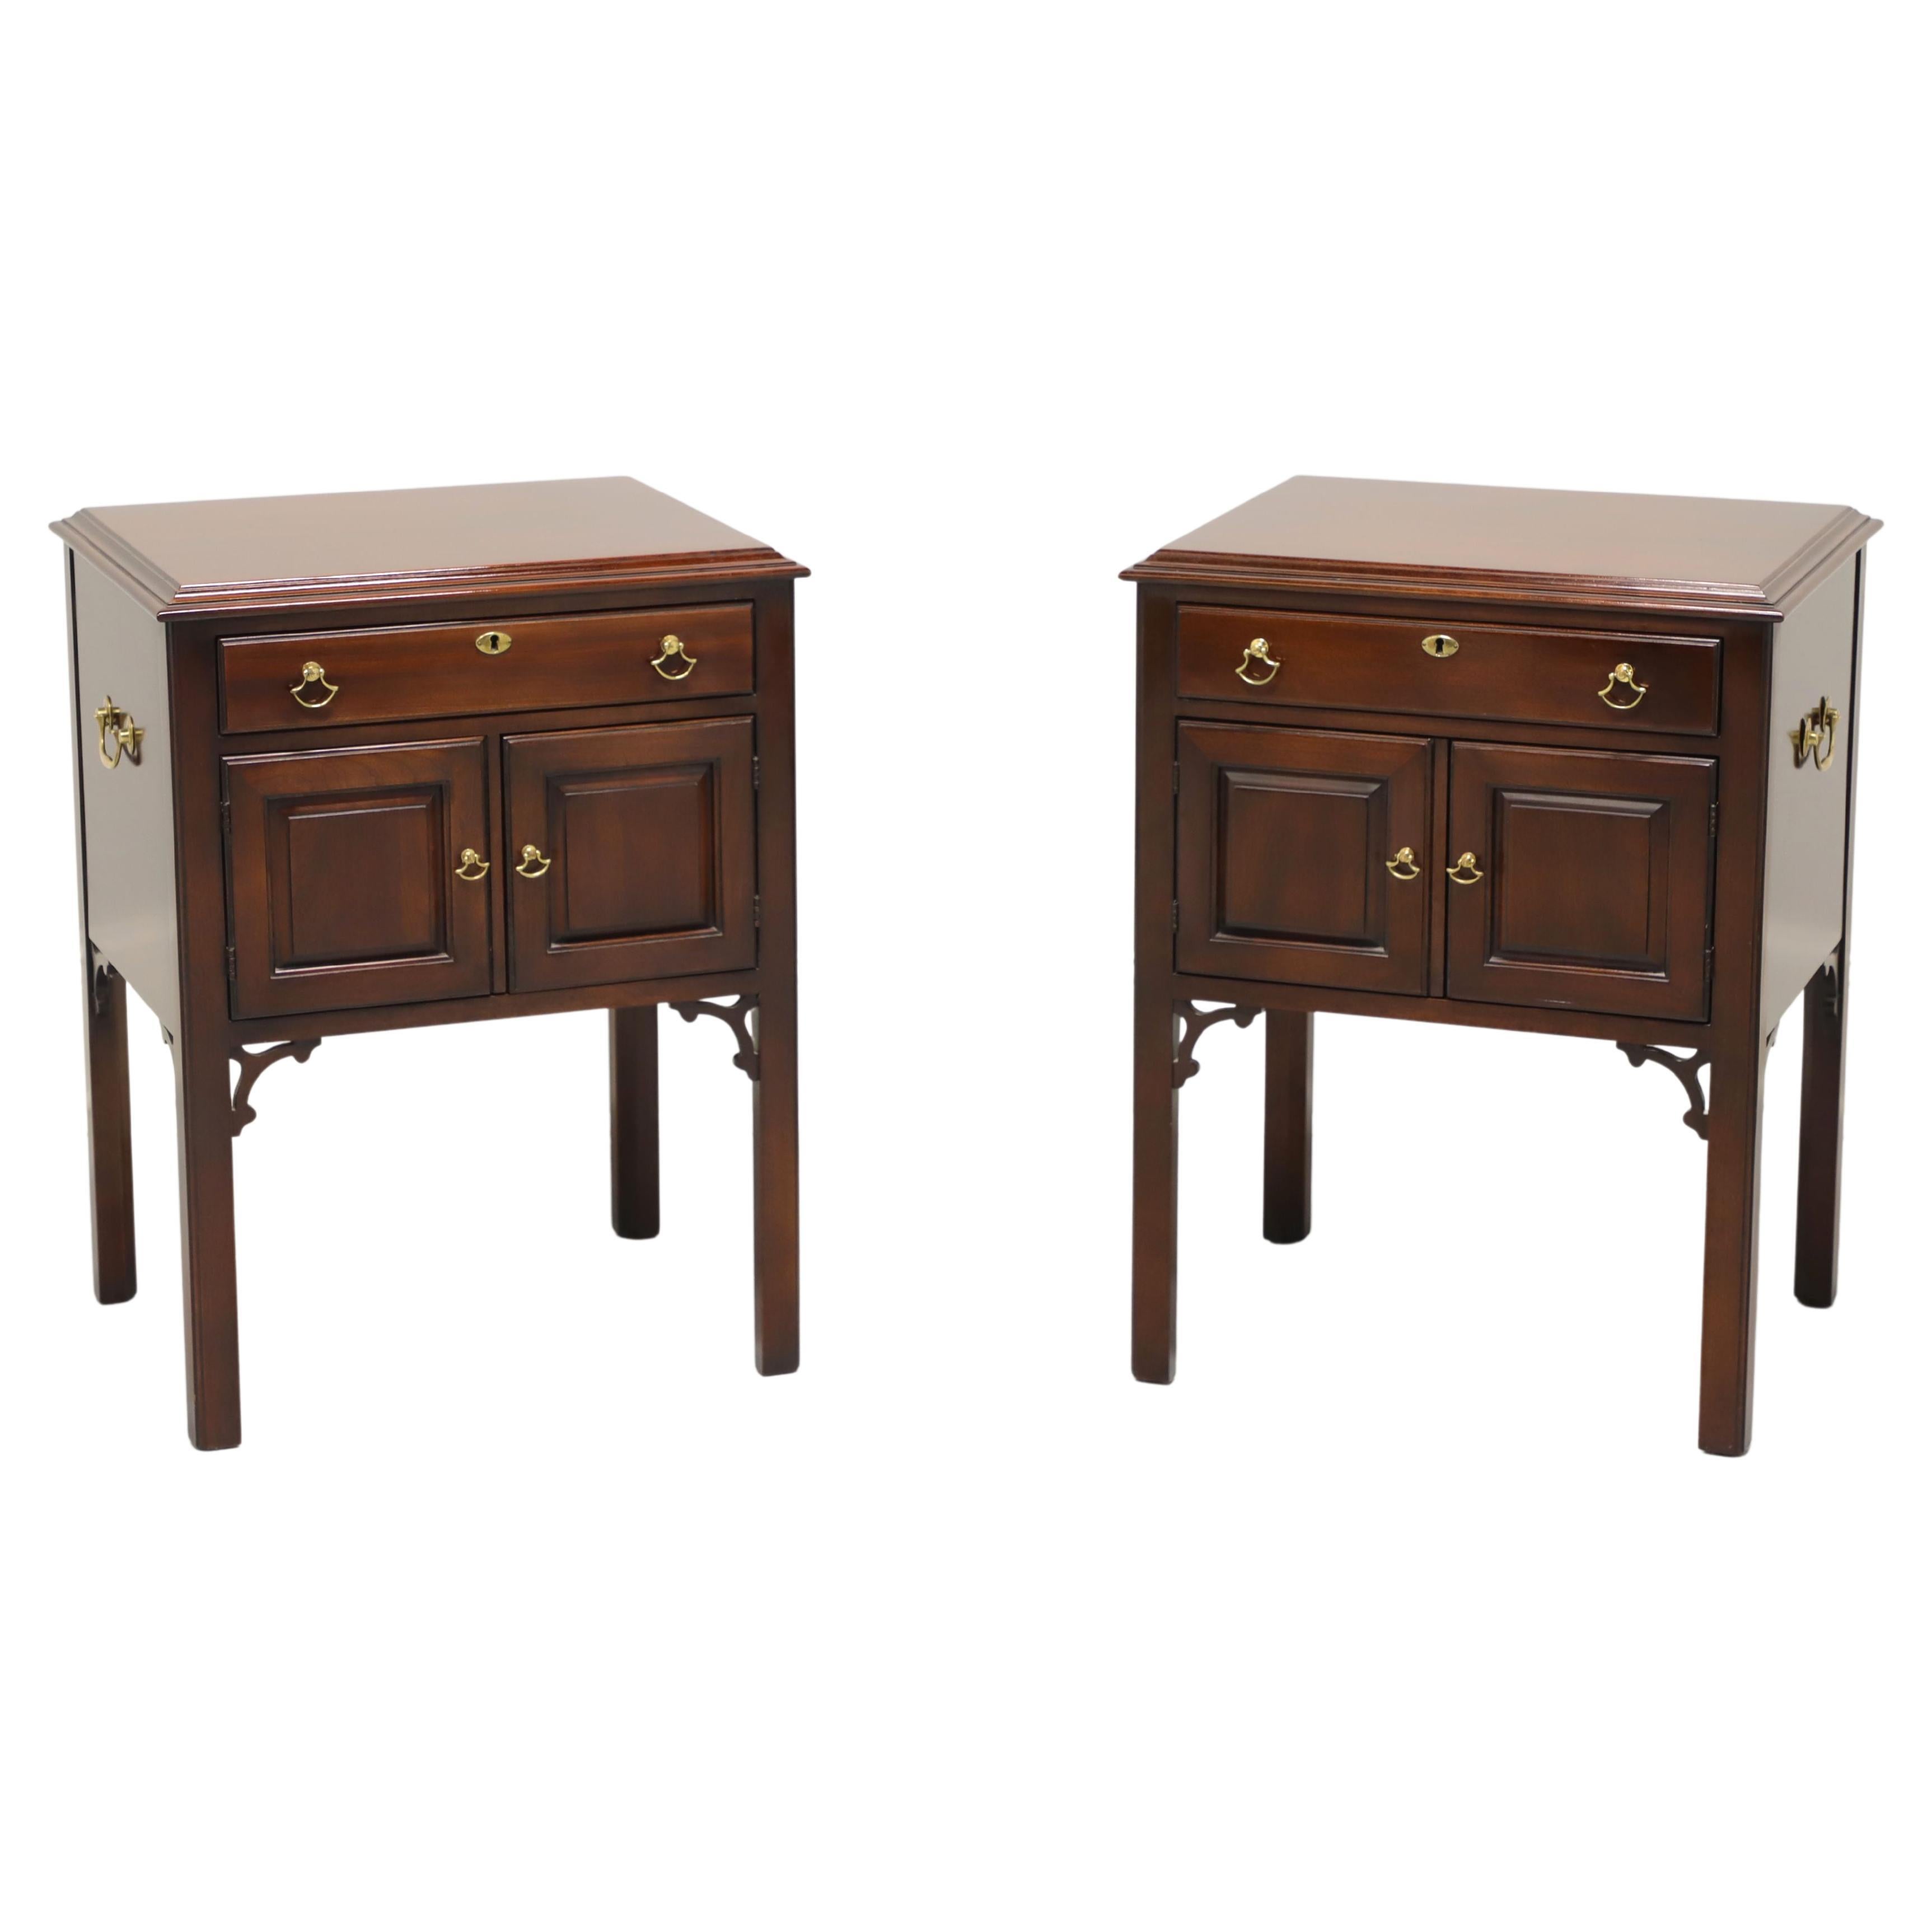 STATTON Old Towne Cherry Chippendale Style Nightstands - Pair